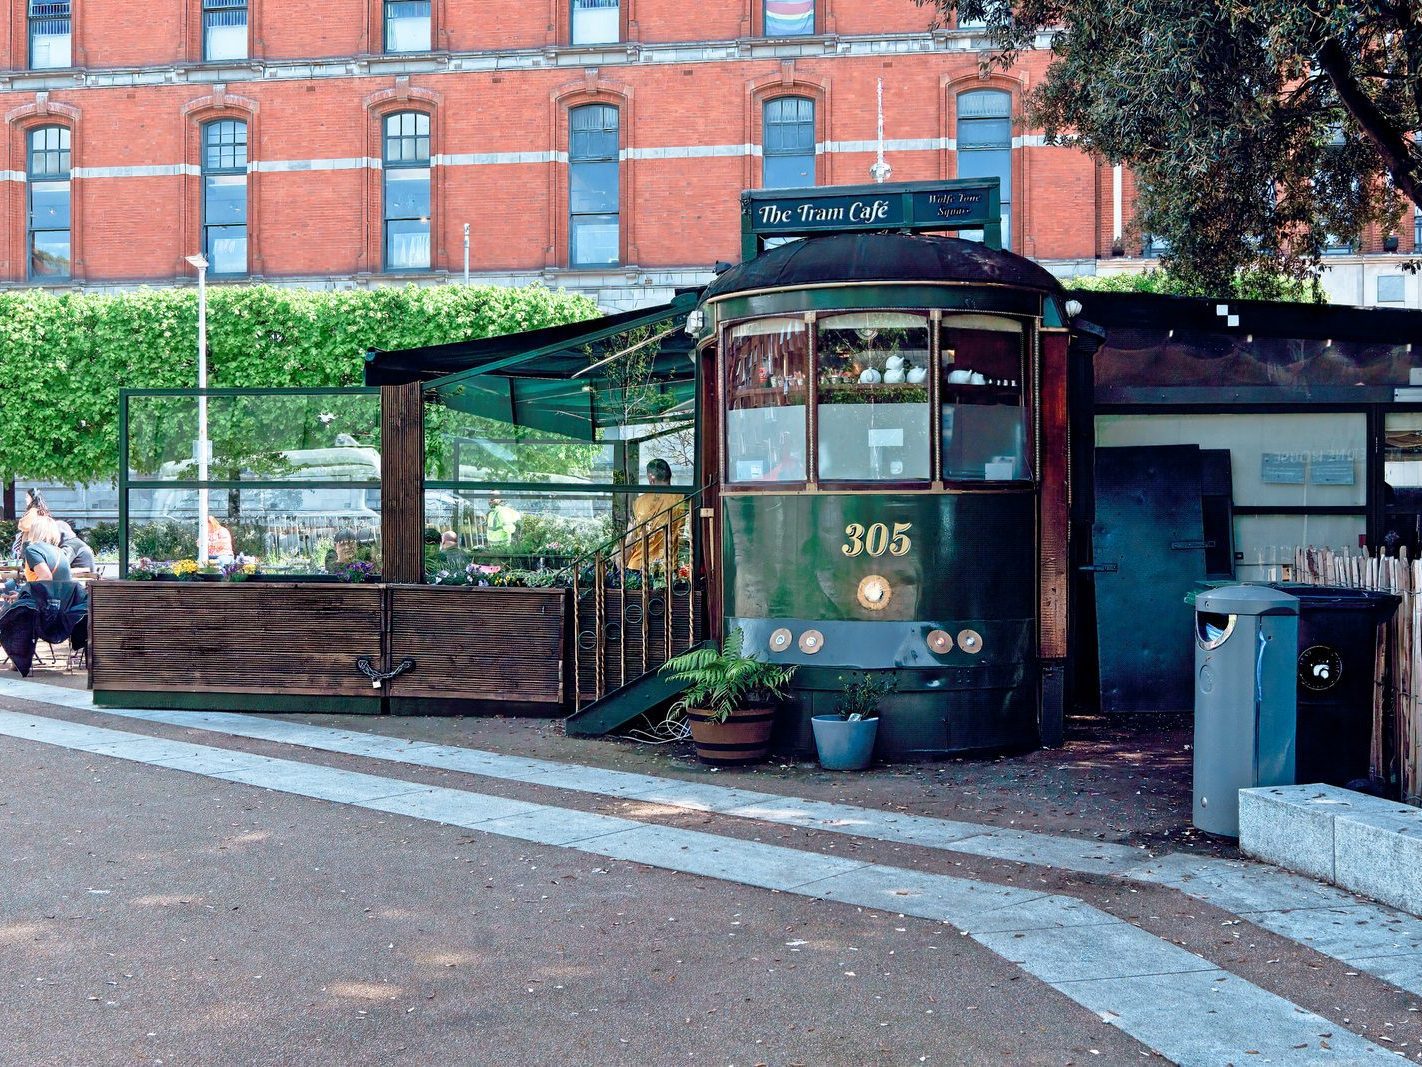 FEATURING TRAM 305 WHICH IS NOW A POPULAR CAFE 008